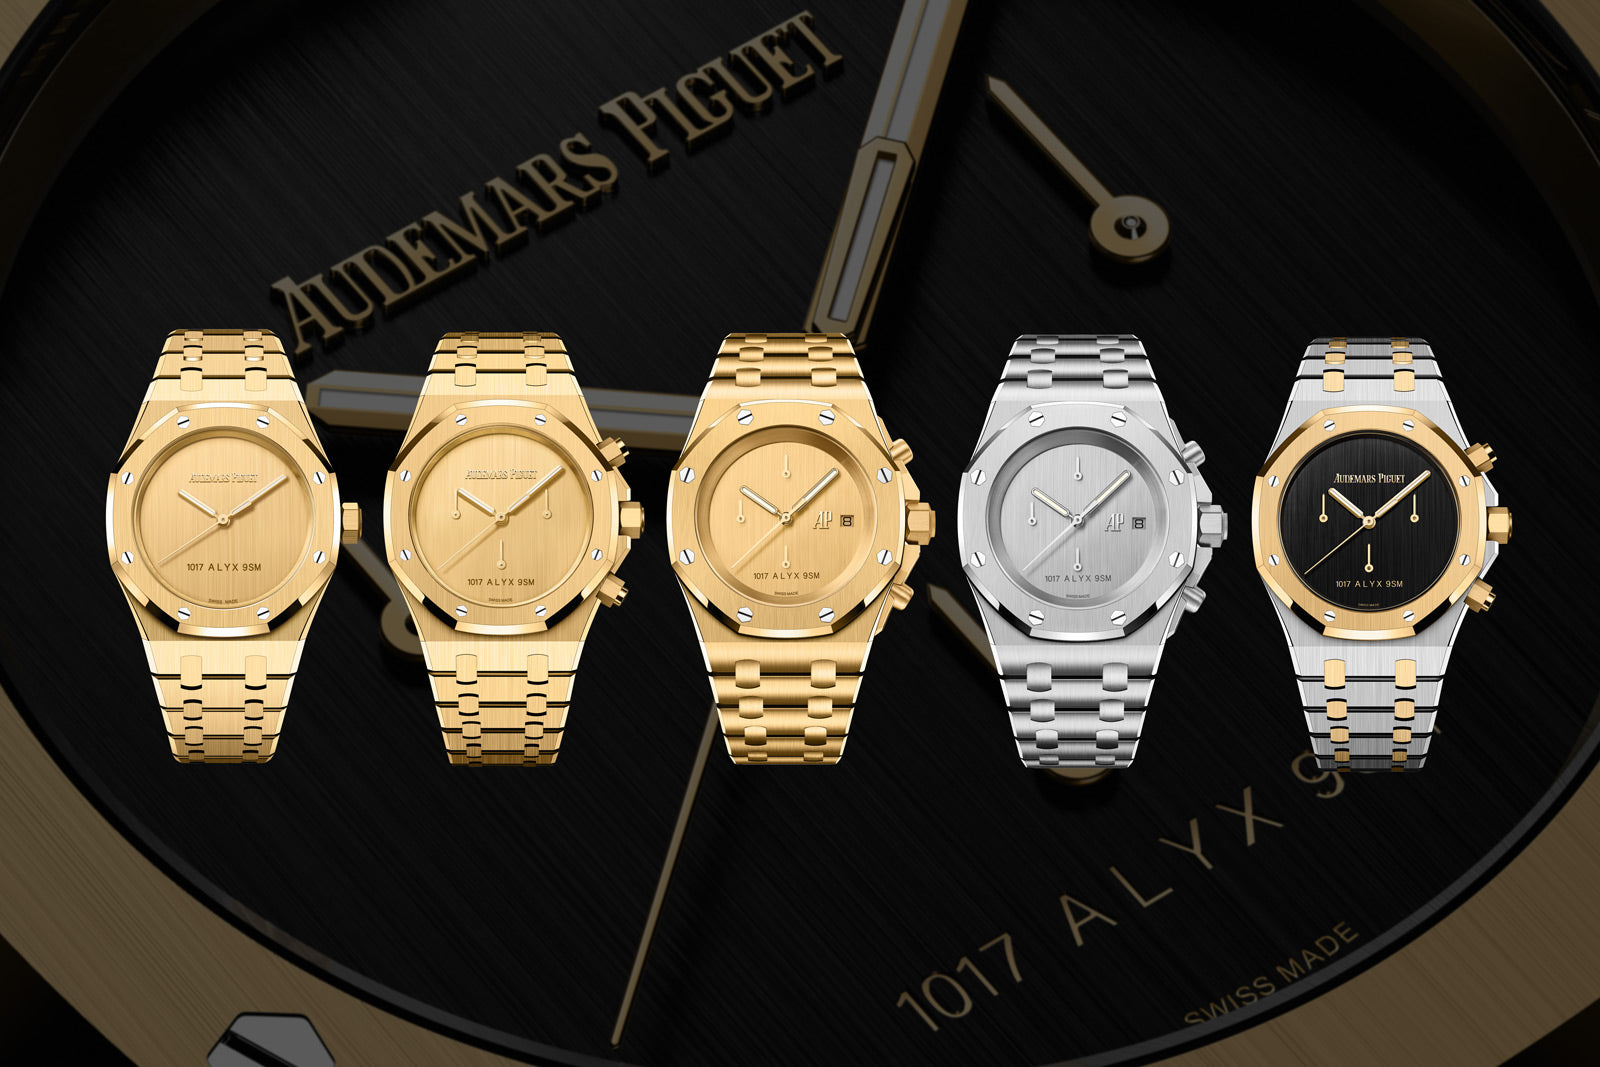 Audemars Piguet Joins Forces with Matthew Williams and 1017 ALYX 9SM